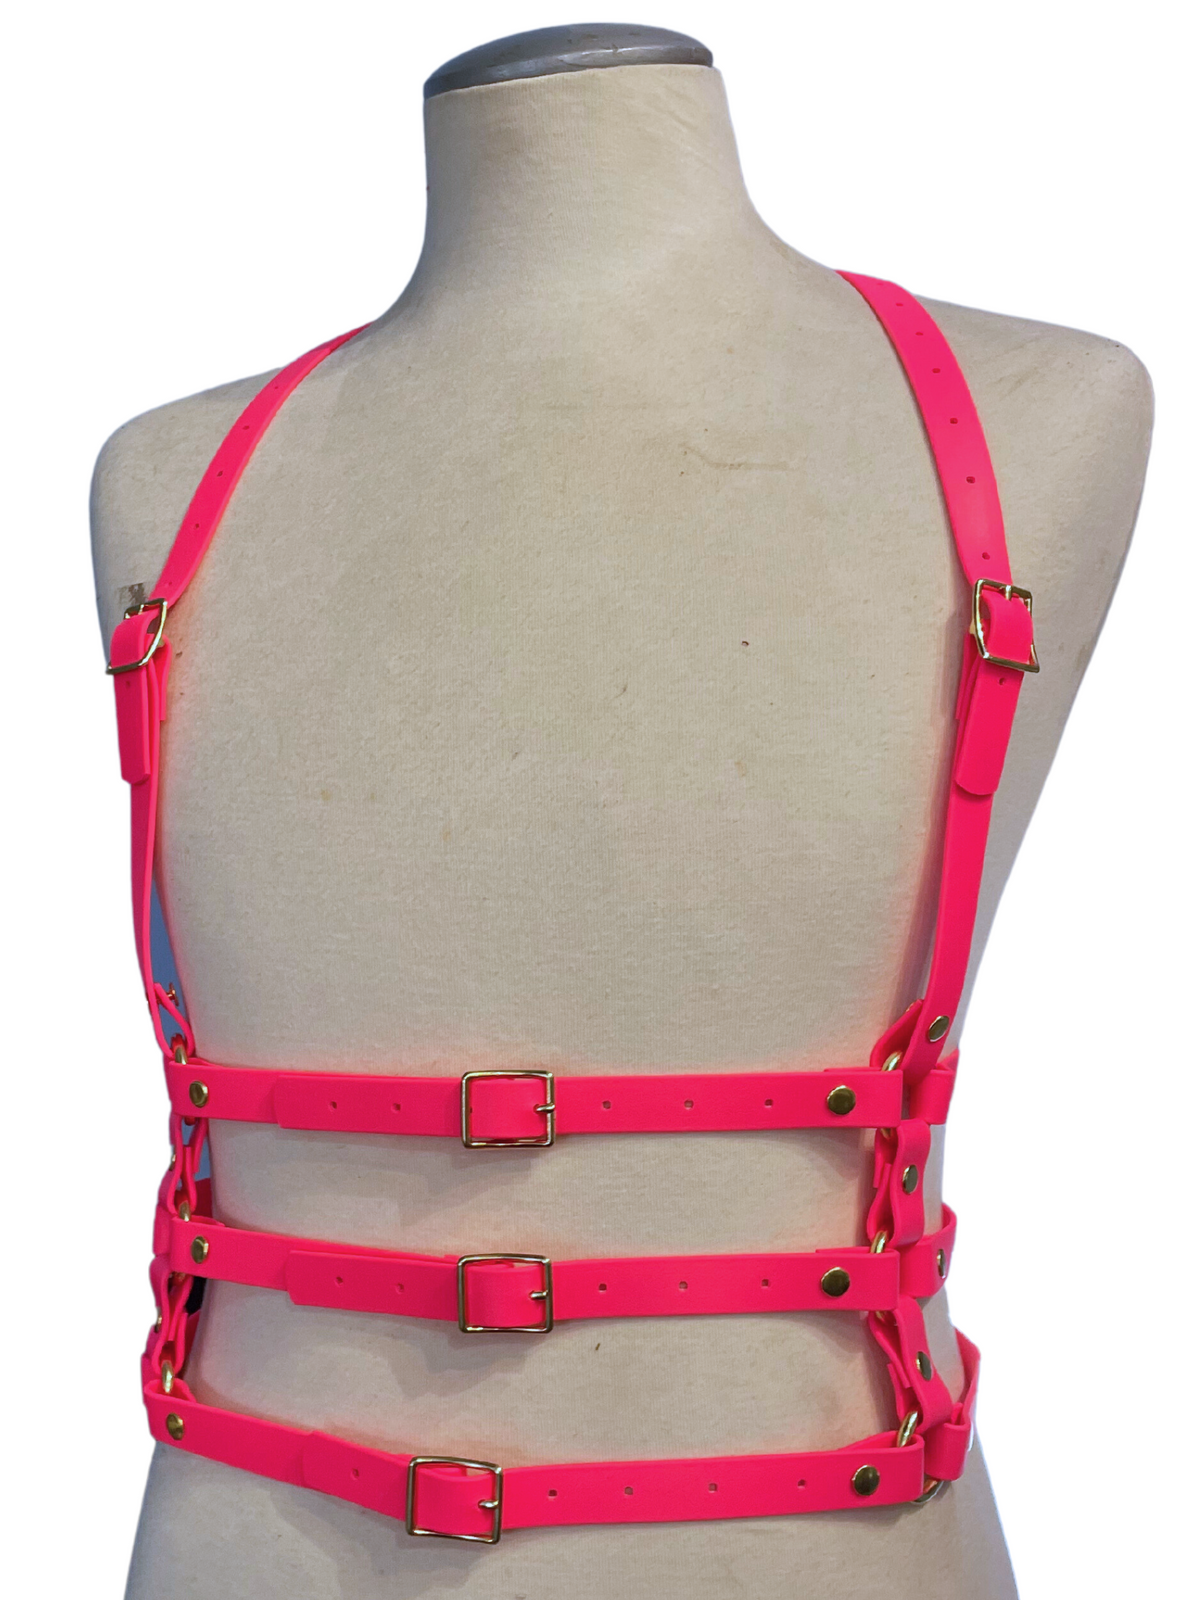 Neon pink vegan leather harness on a mannequin